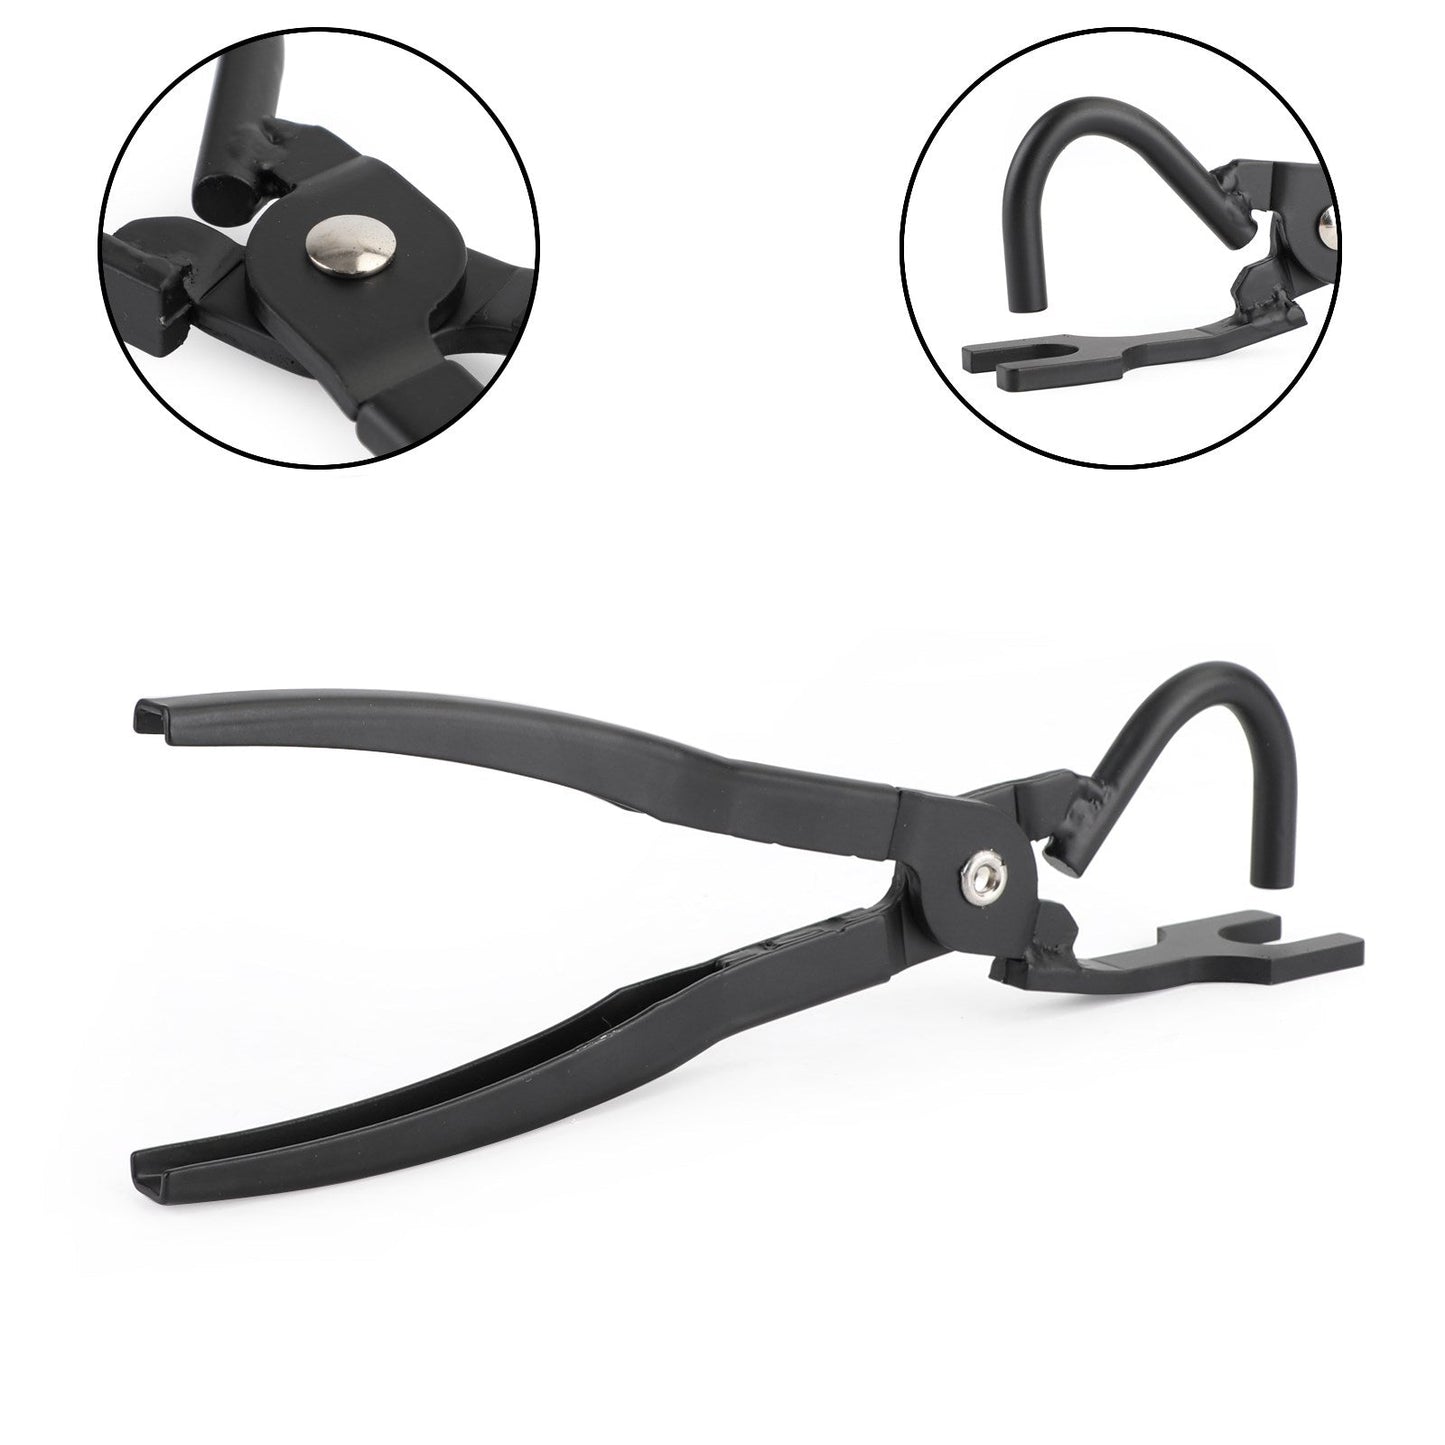 38350 Exhaust Hanger Removal Pliers Clamps for Automotive Tool Black